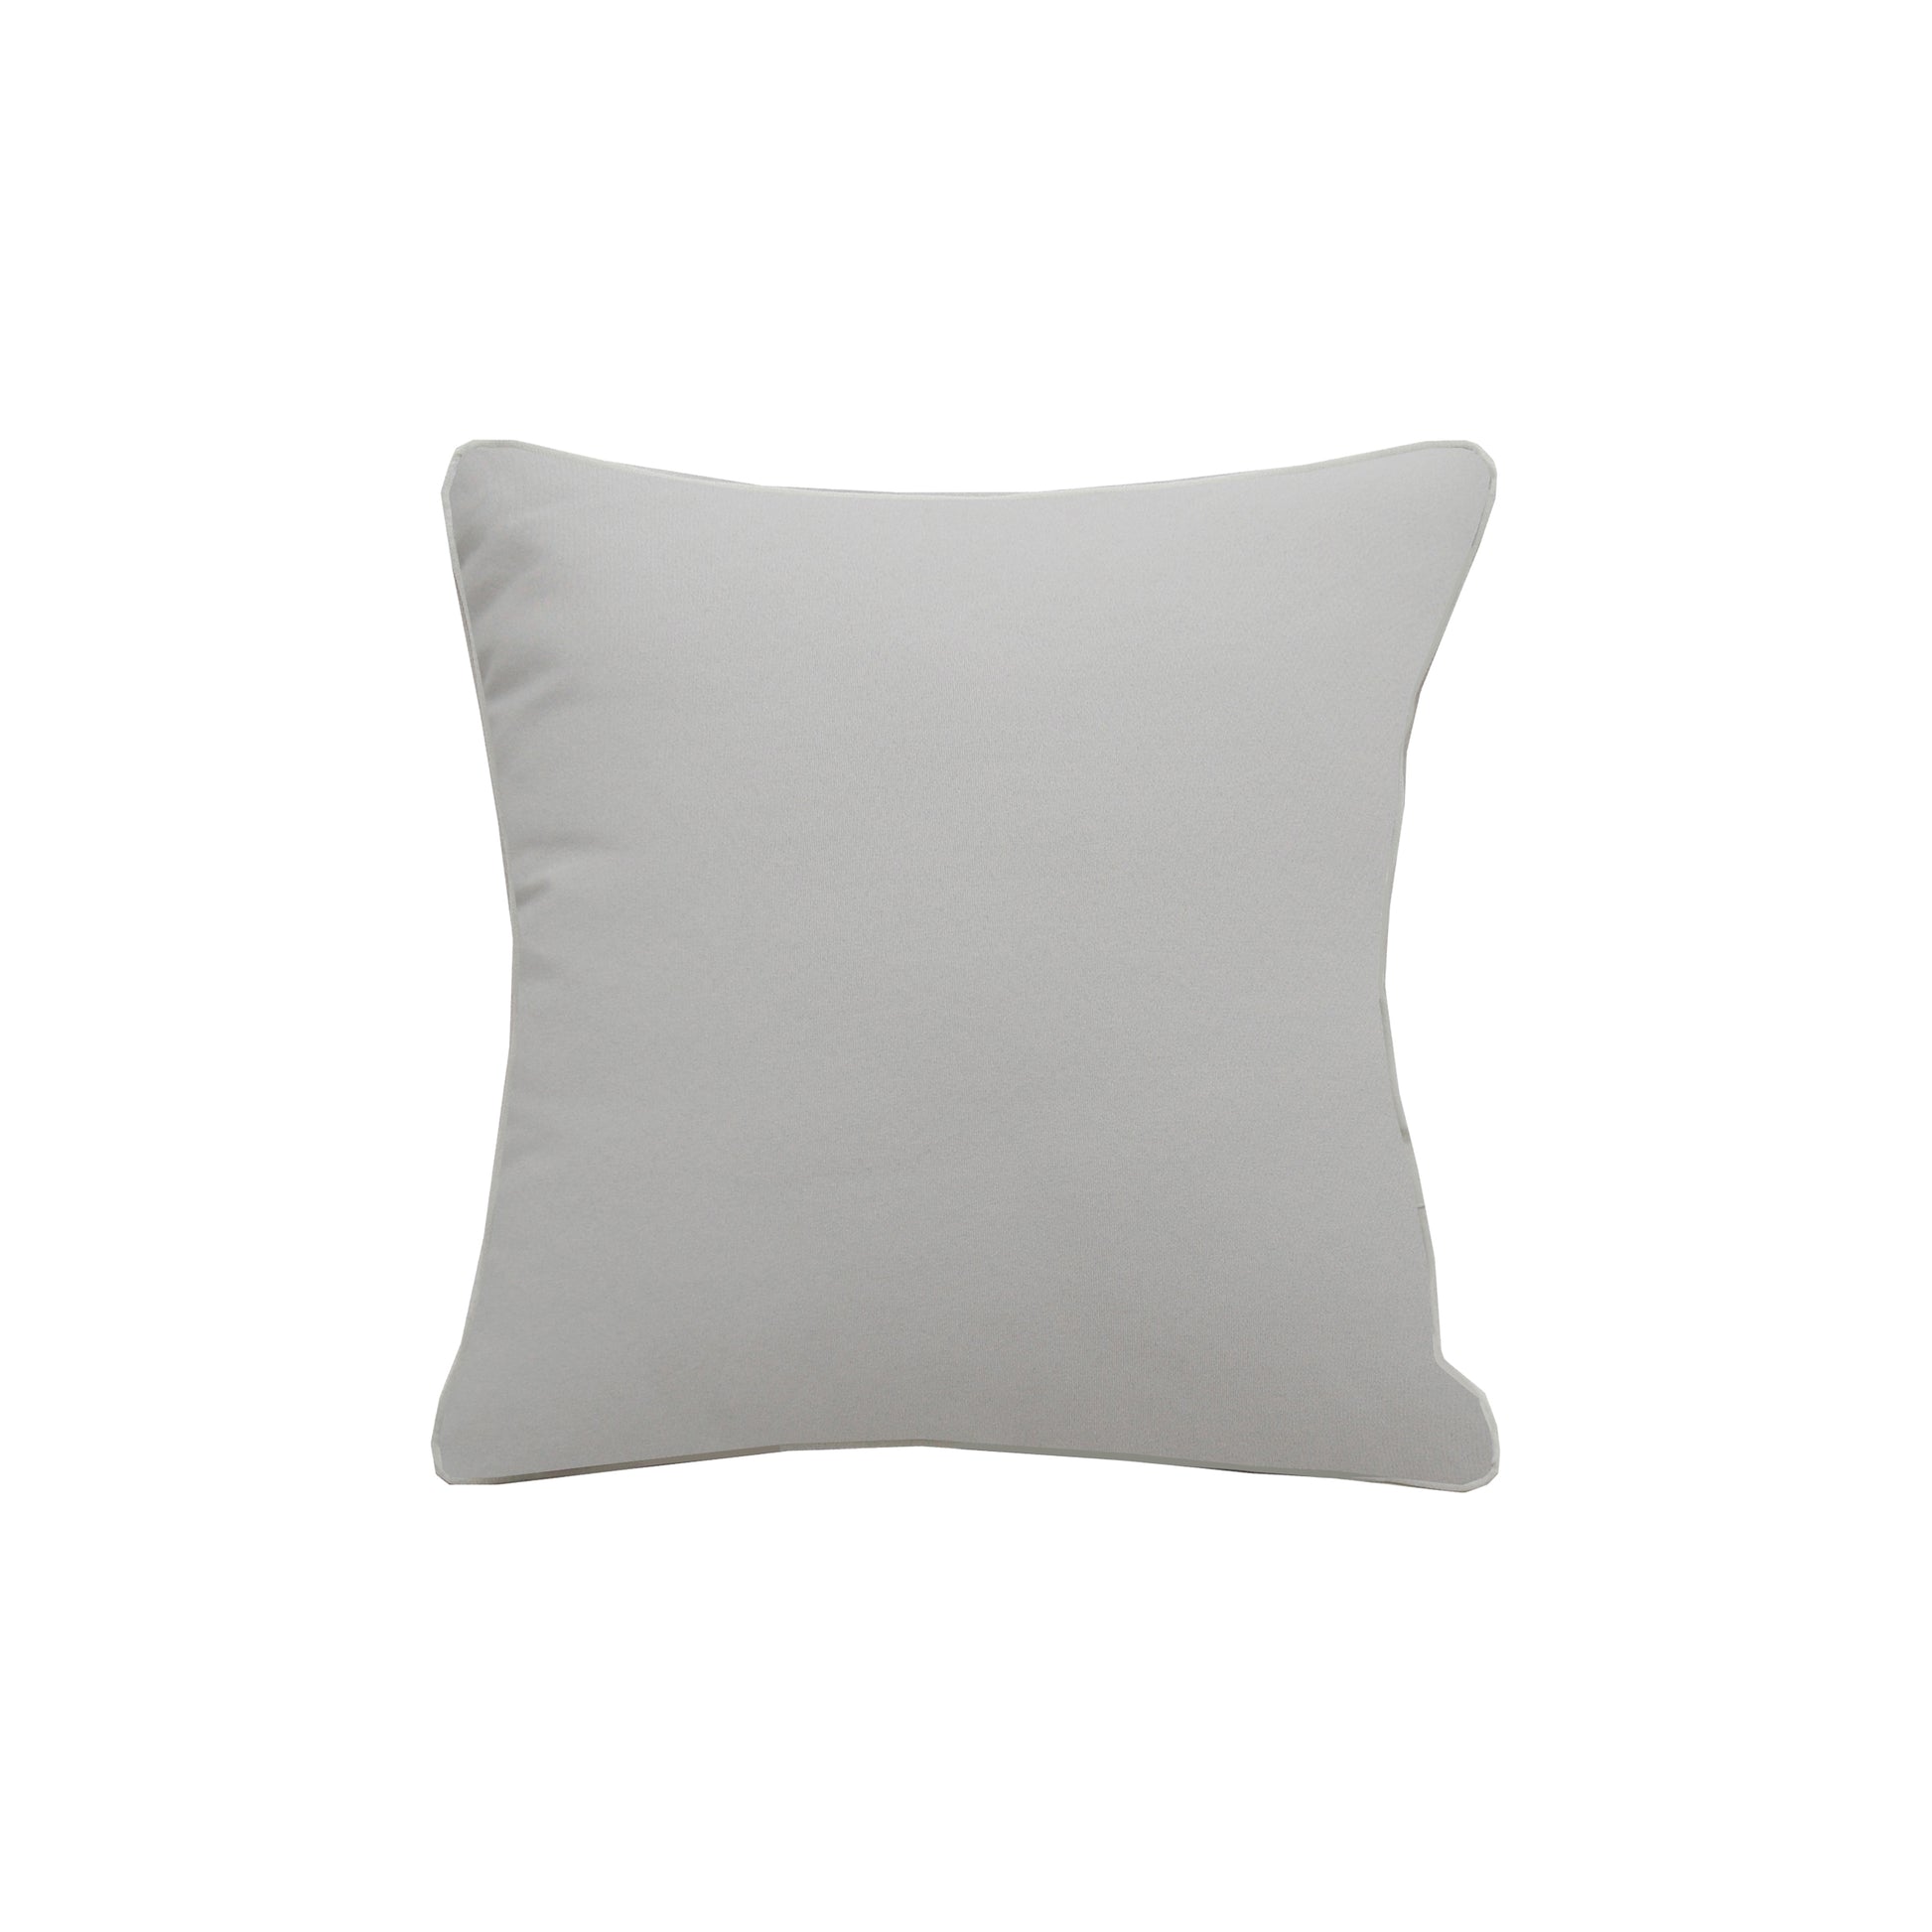 Solid grey fabric; back side of the Sandpiper Chillin Left pillow.